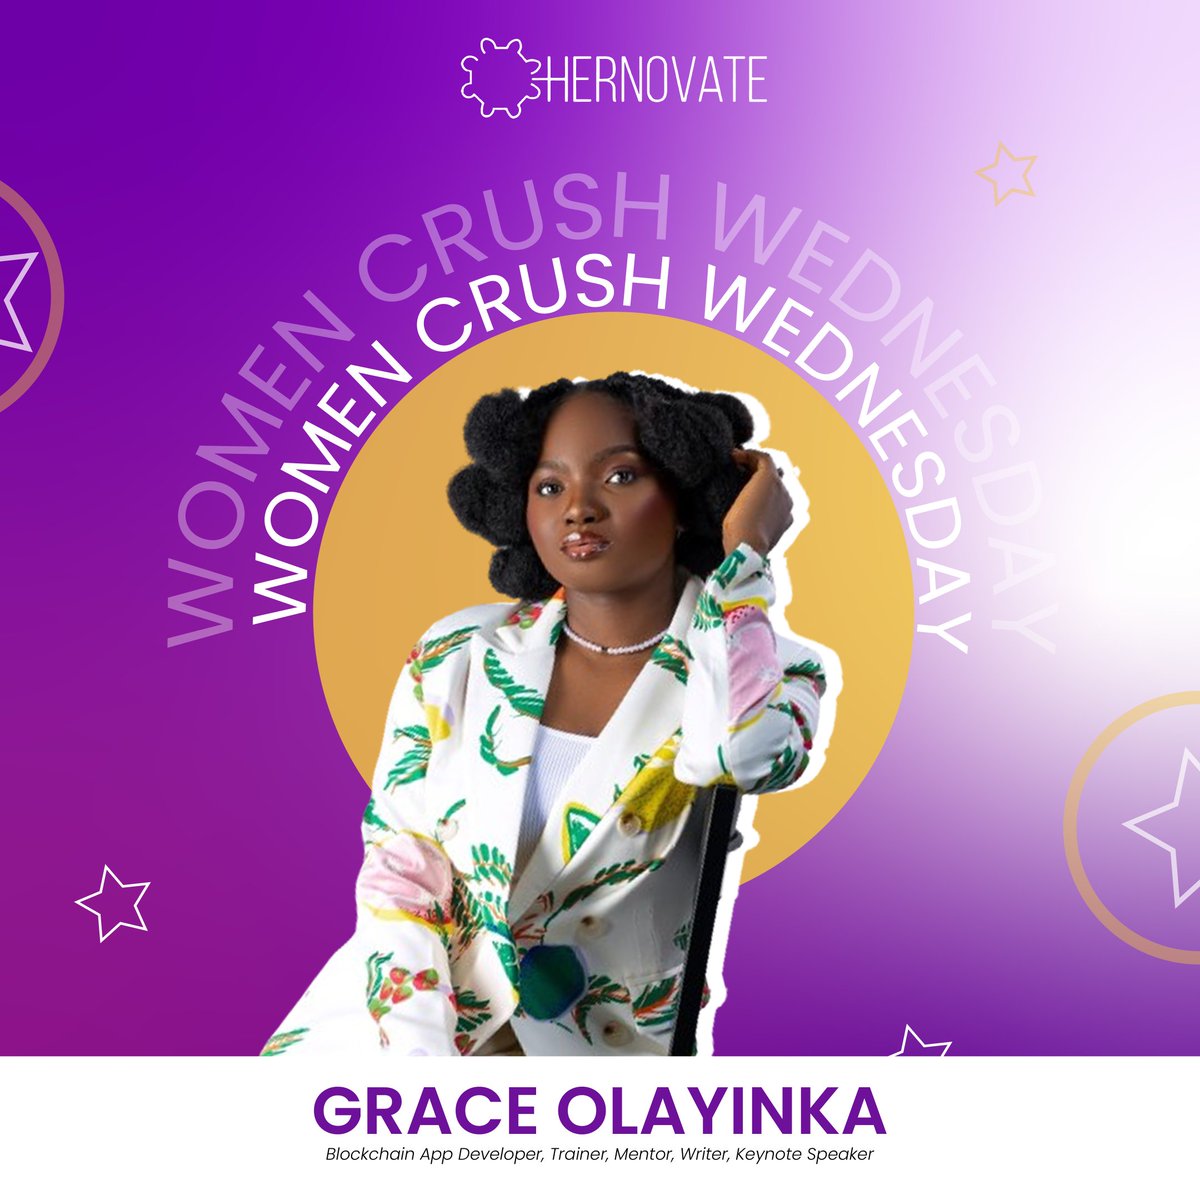 Meet our Woman Crush of the month @graceomole3. 

Grace Olayinka is a Tech Lead, a Blockchain App Developer and the Cofounder of Solaceswags.

Her journey as a tech lead and a business woman is inspiring to say the least.

Hernovate celebrates you today! Keep shining brightly 🌟